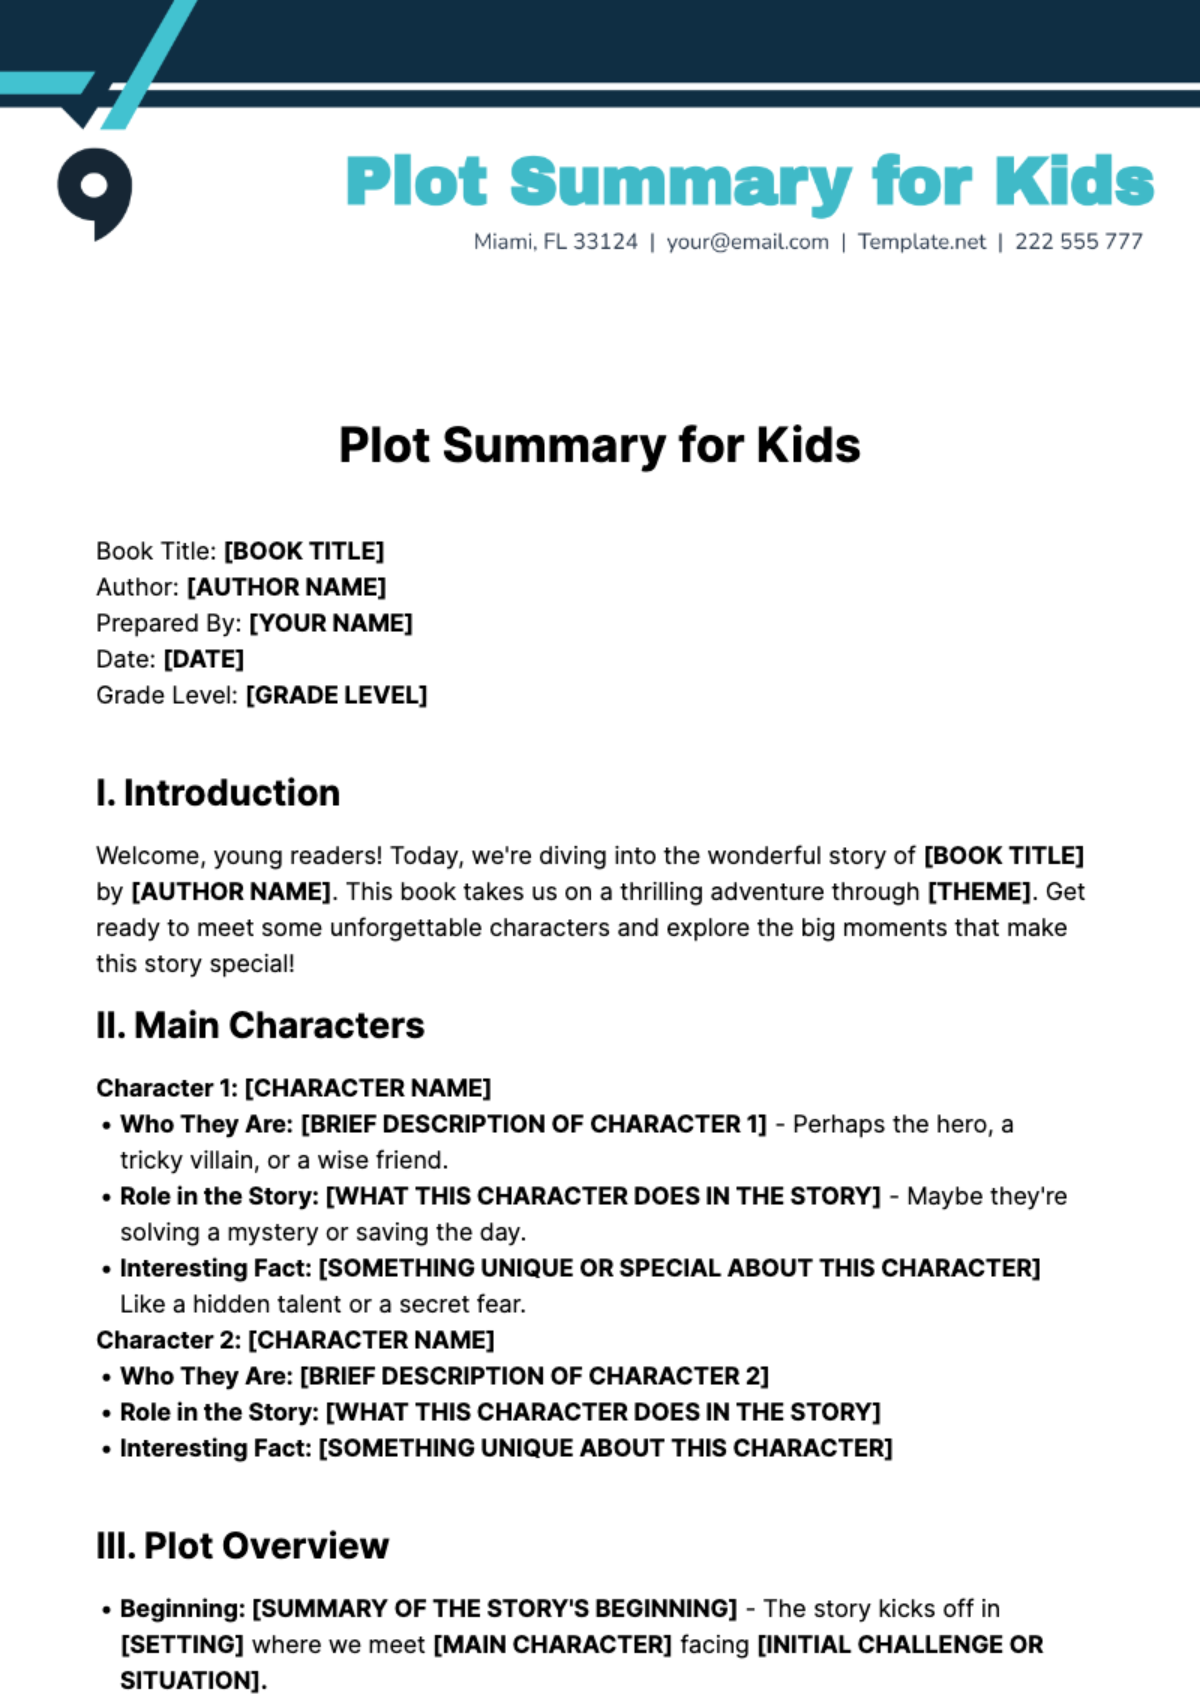 Plot Summary for Kids Template